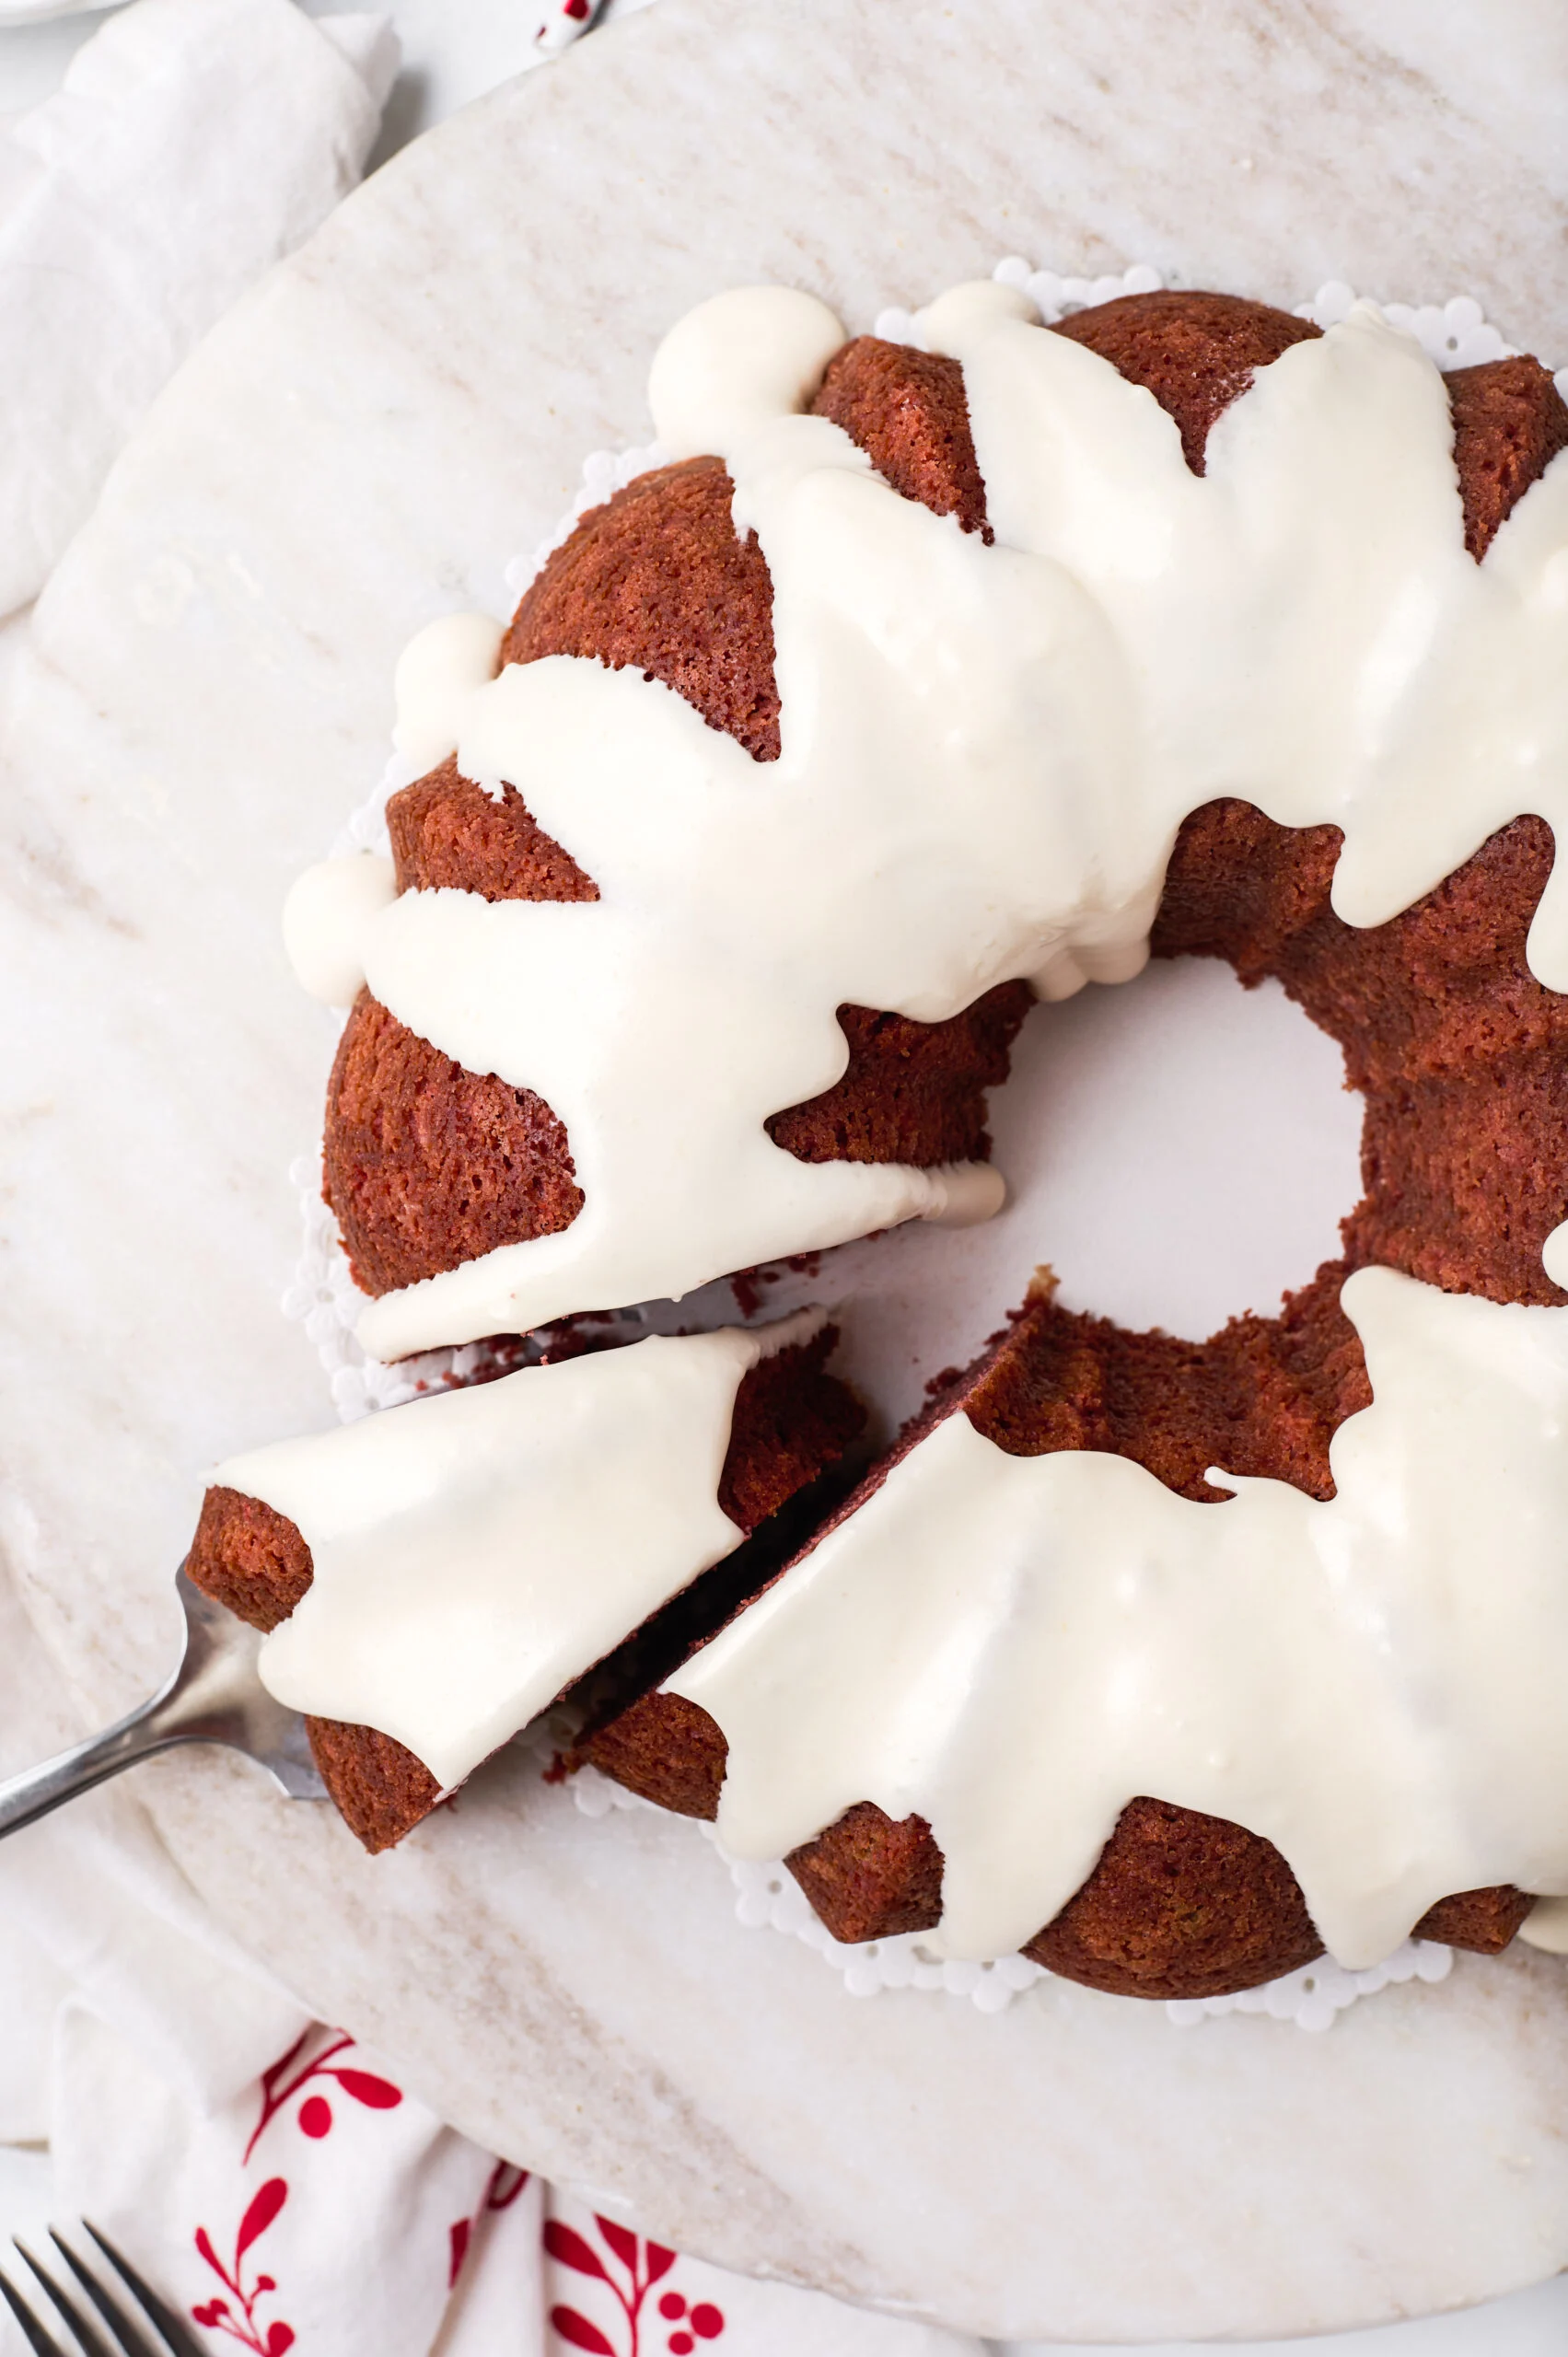 birds eye image of a whole red velvet bundt cake with a slice being removed